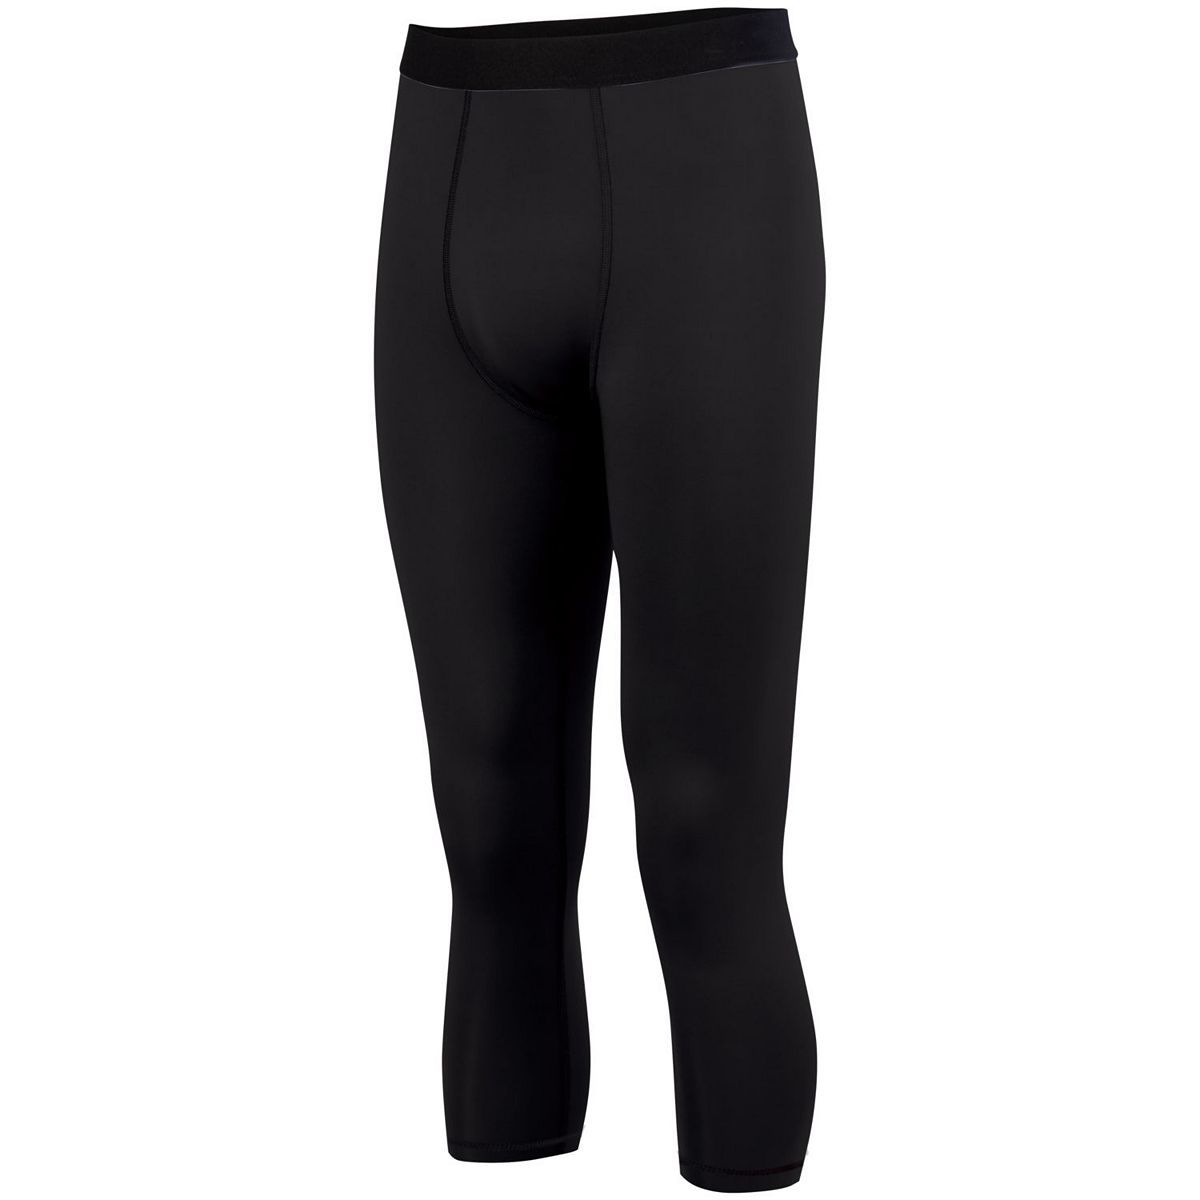 YOUTH HYPERFORM COMPRESSION CALF-LENGTH TIGHT from Augusta Sportswear